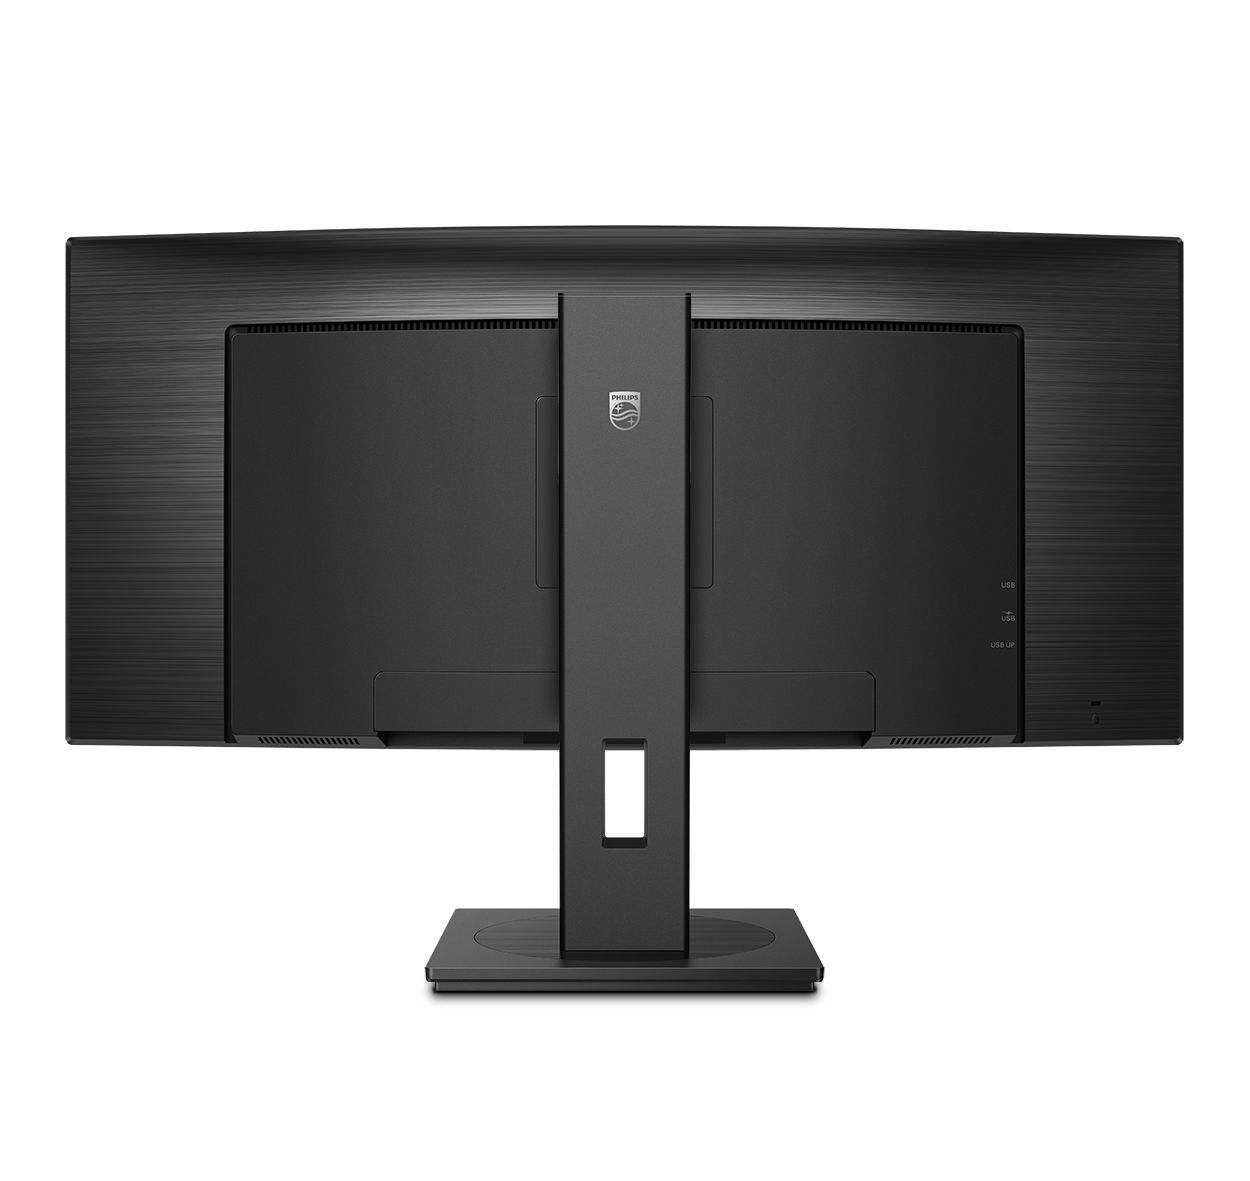 Curved UltraWide LCD Monitor with USB-C 346B1C/27 | Philips